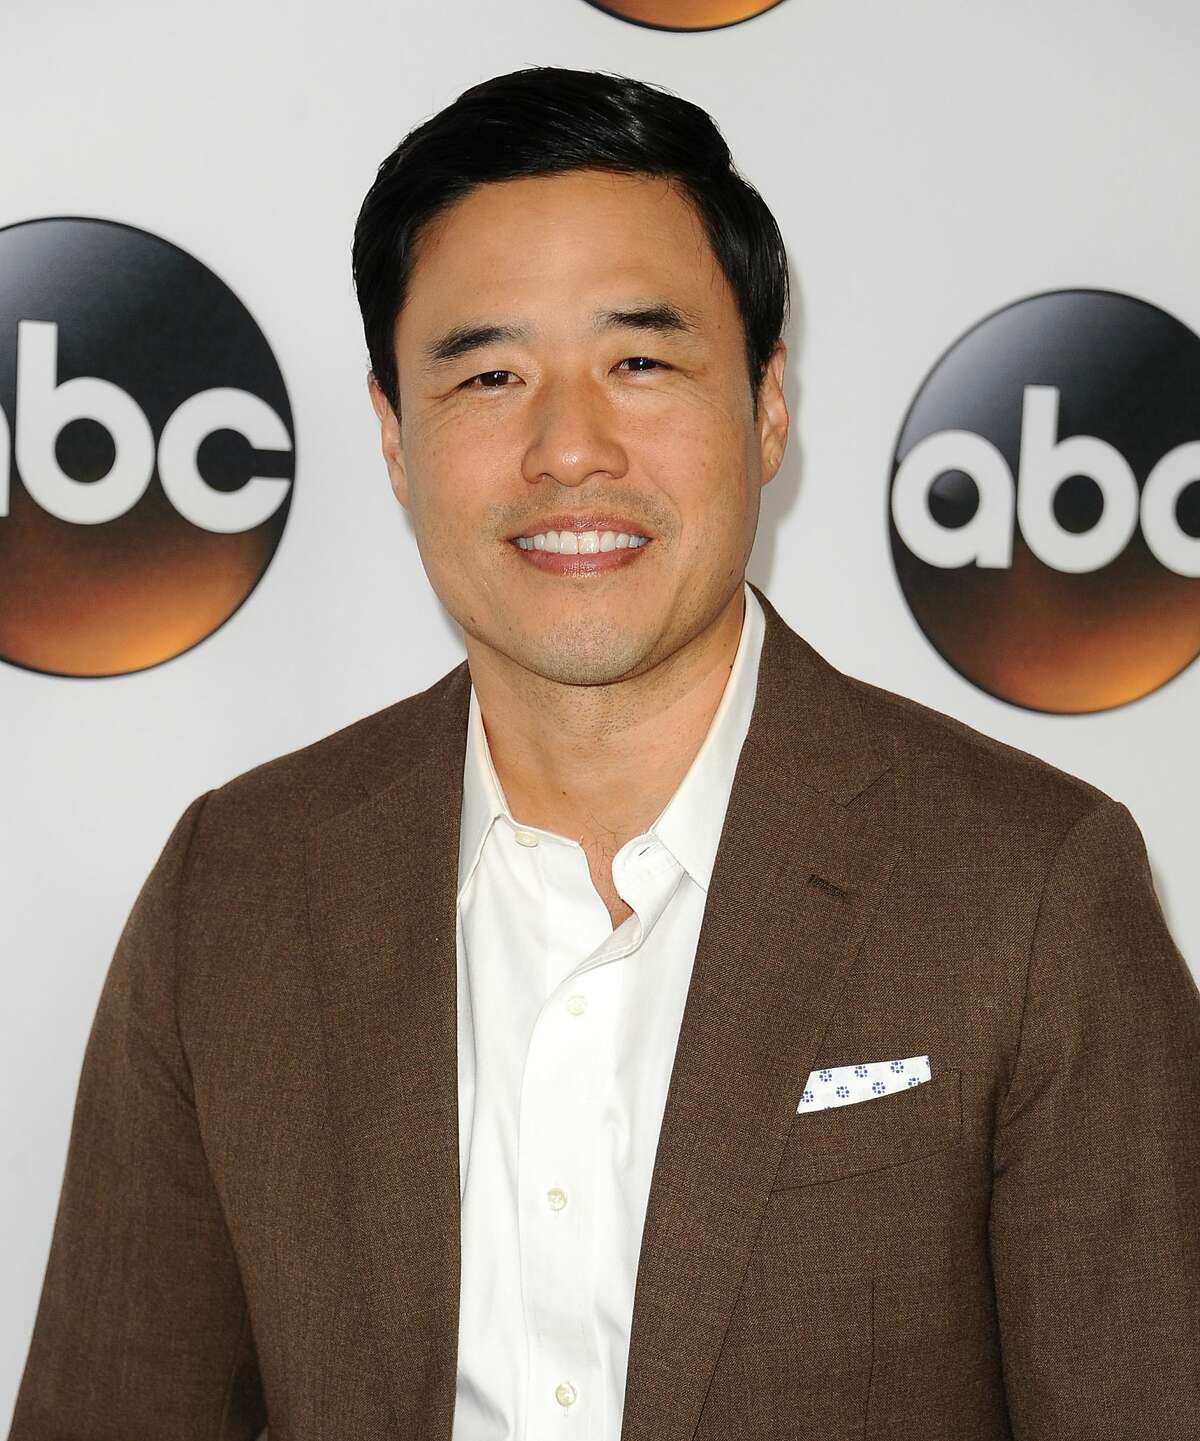 BEVERLY HILLS, CA - AUGUST 06: Actor Randall Park attends the Disney ABC Television Group TCA summer press tour at The Beverly Hilton Hotel on August 6, 2017 in Beverly Hills, California.